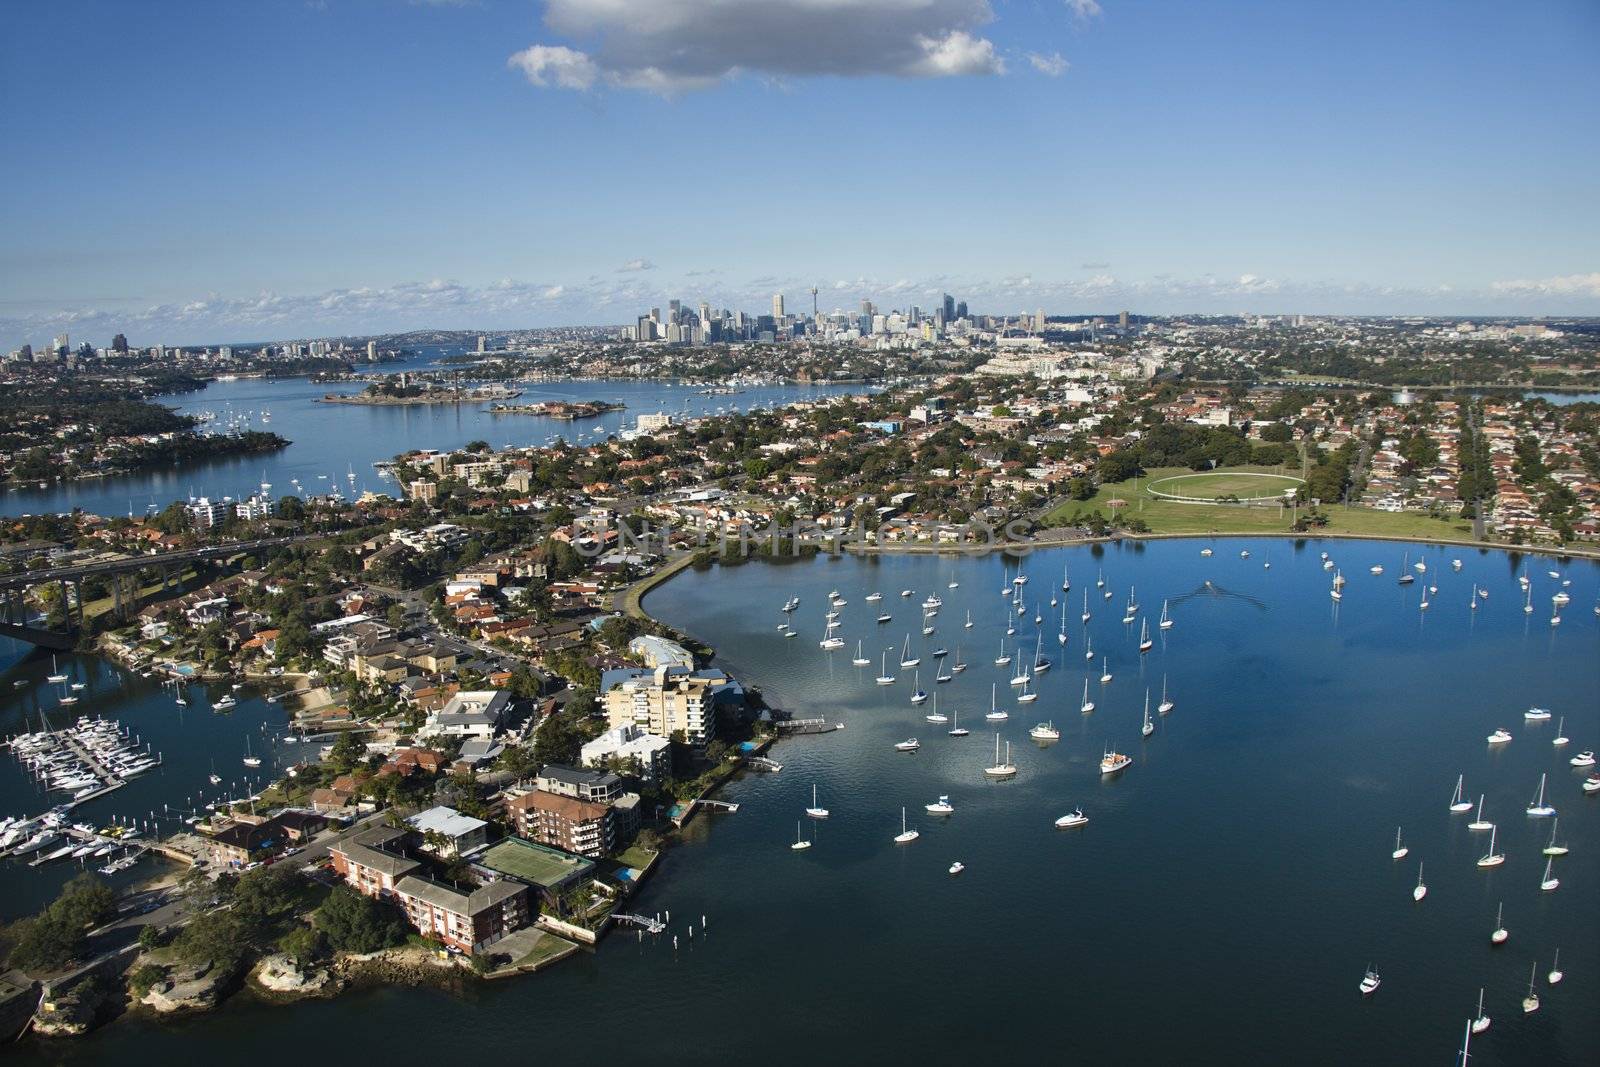 Aerial view of boats and buildings in Sydney, Australia from Five Dock Bay in Drummoyne.